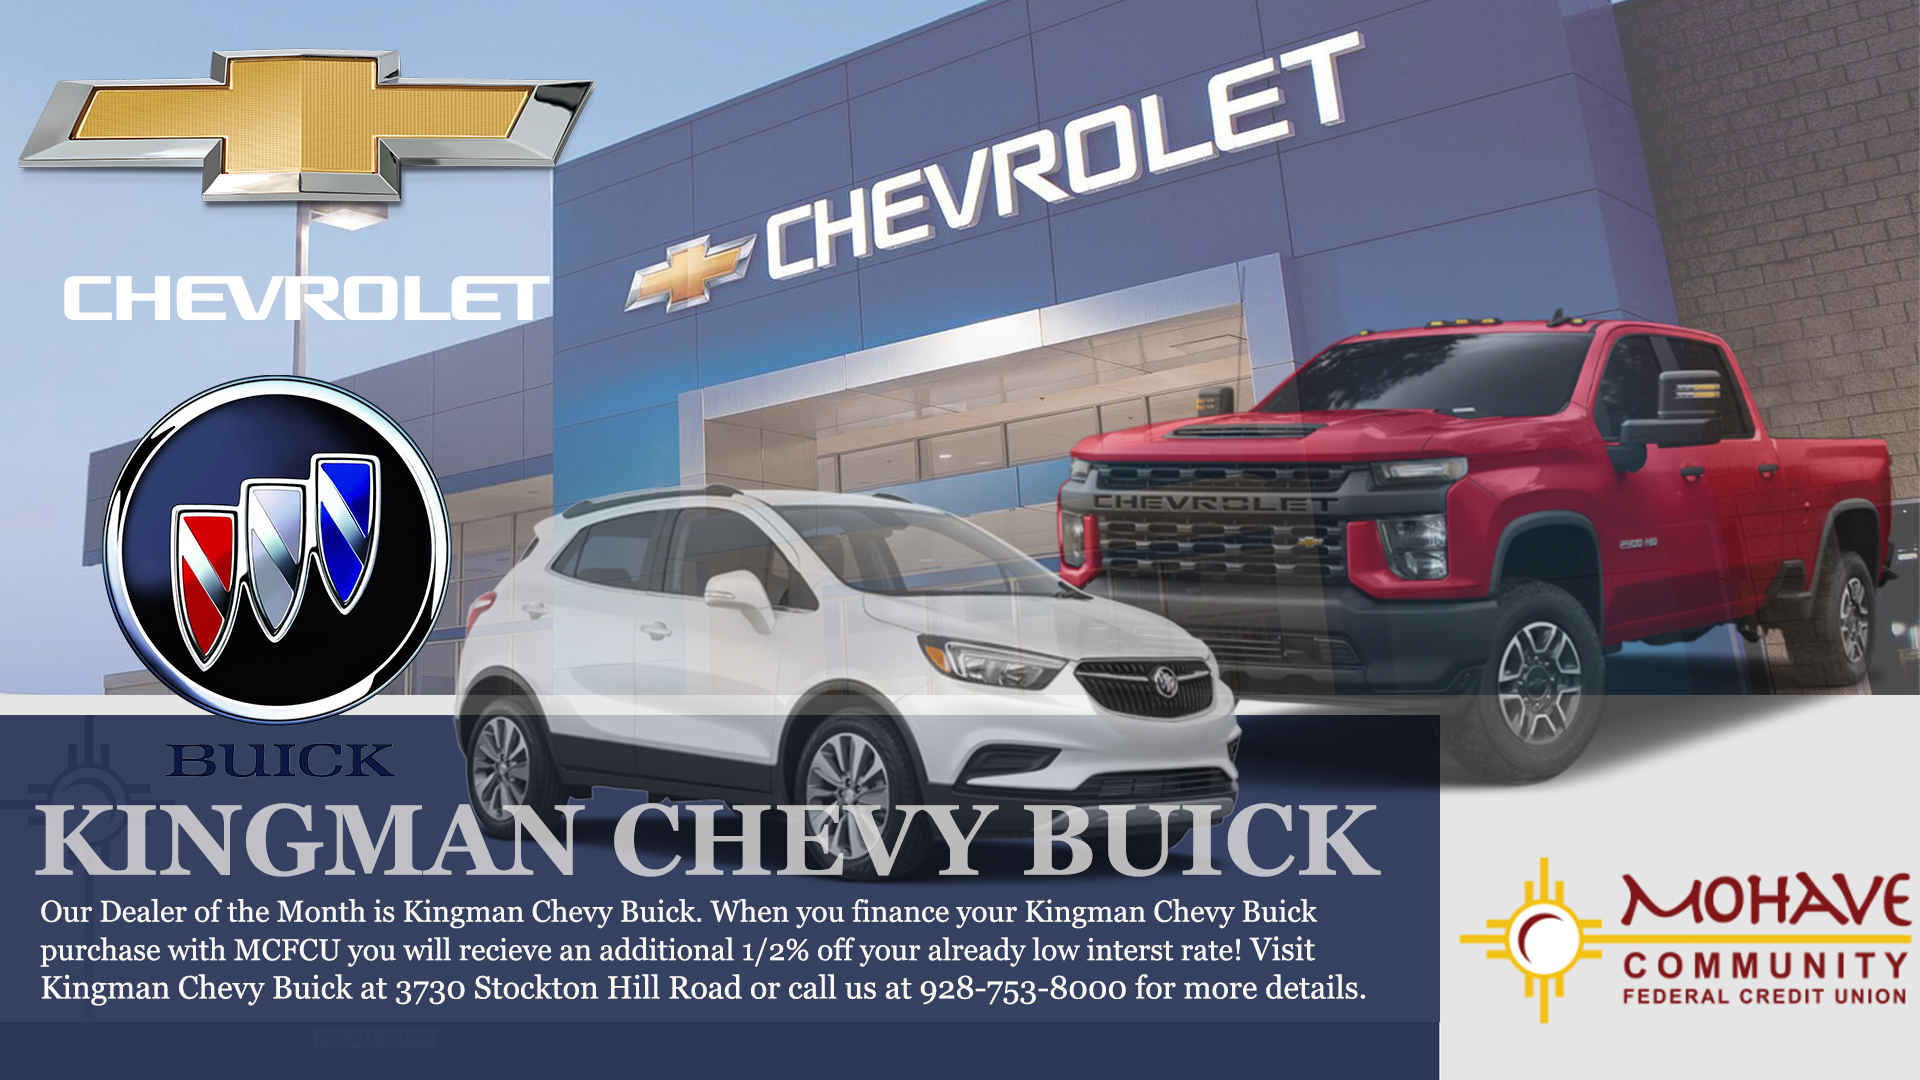 Kingman Chevy Buick is our dealer of the month! When you finance your Kingman Chevy Buick purchase with Mohave Community FCU, you will receive an additional 1/2% off your already low interest rate*. Call us today for more info at 928-753-8000. *Advertised Annual Percentage Rate (APR) may change without notice. Approval and rate are based upon credit history, type of product, debt to income, loan term and loan to value (LTV). All loans are subject to credit approval. Some restrictions may apply. Member NCUA.